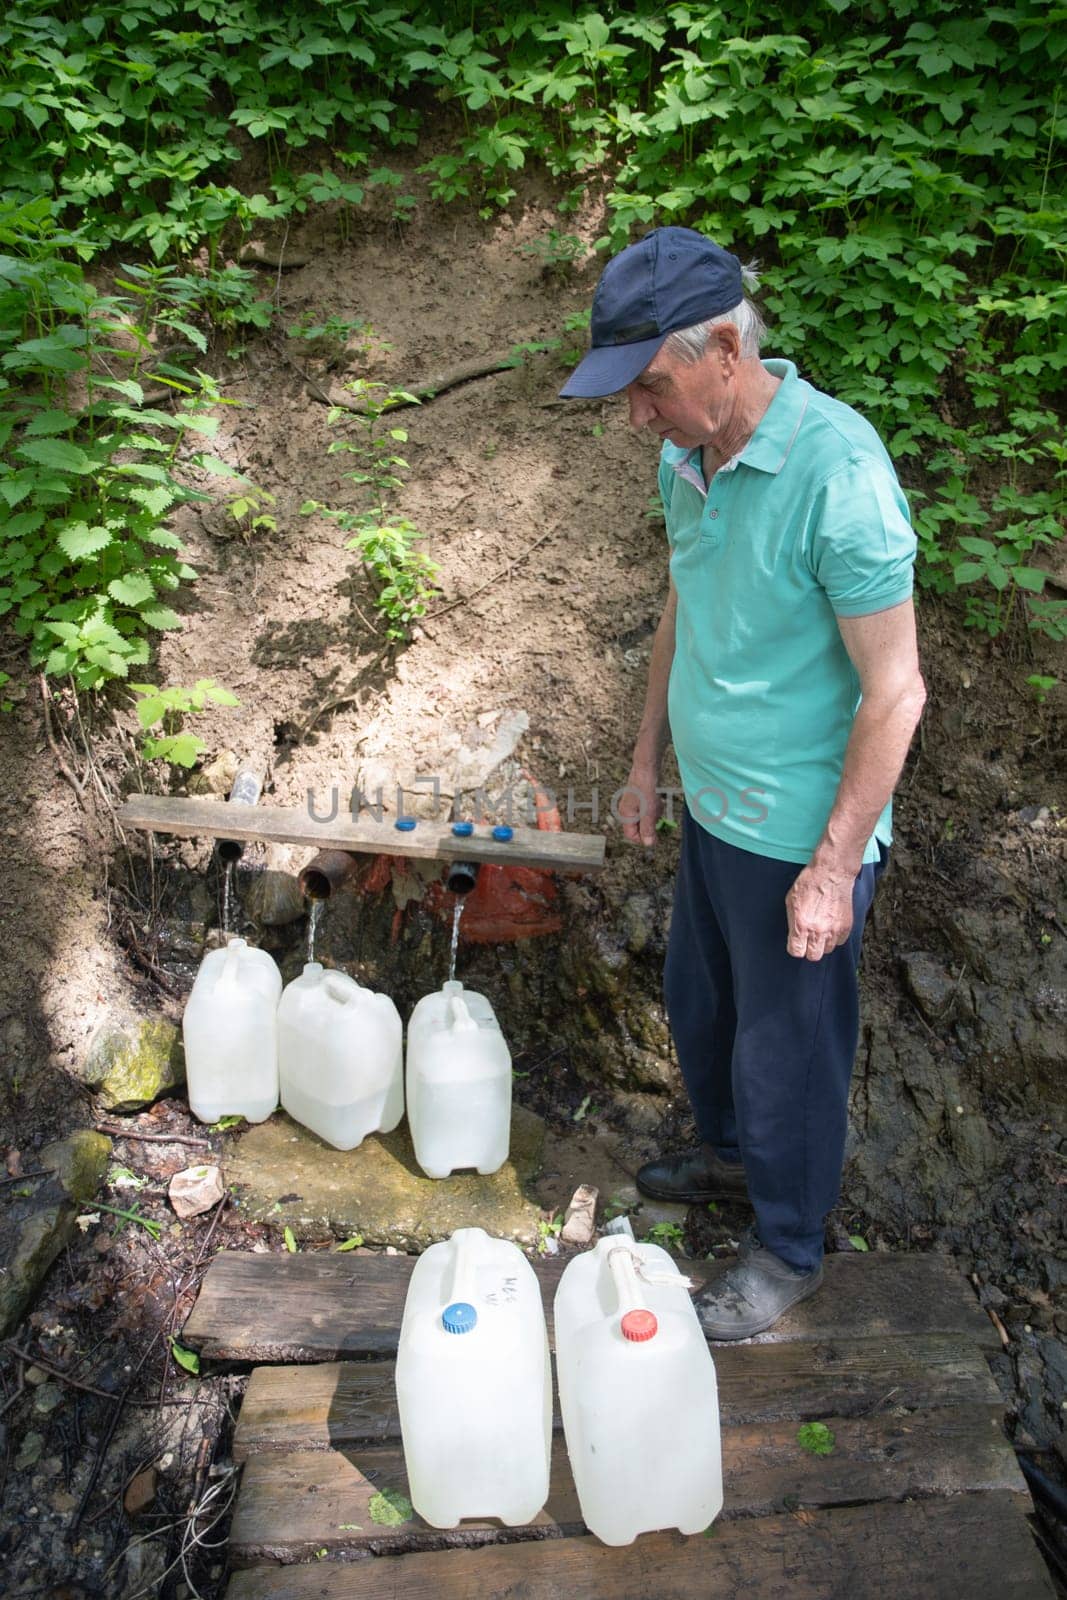 middle aged man fills canisters with clean fresh water from a spring, an underground source of drinking mineral water, high quality photo. by KaterinaDalemans